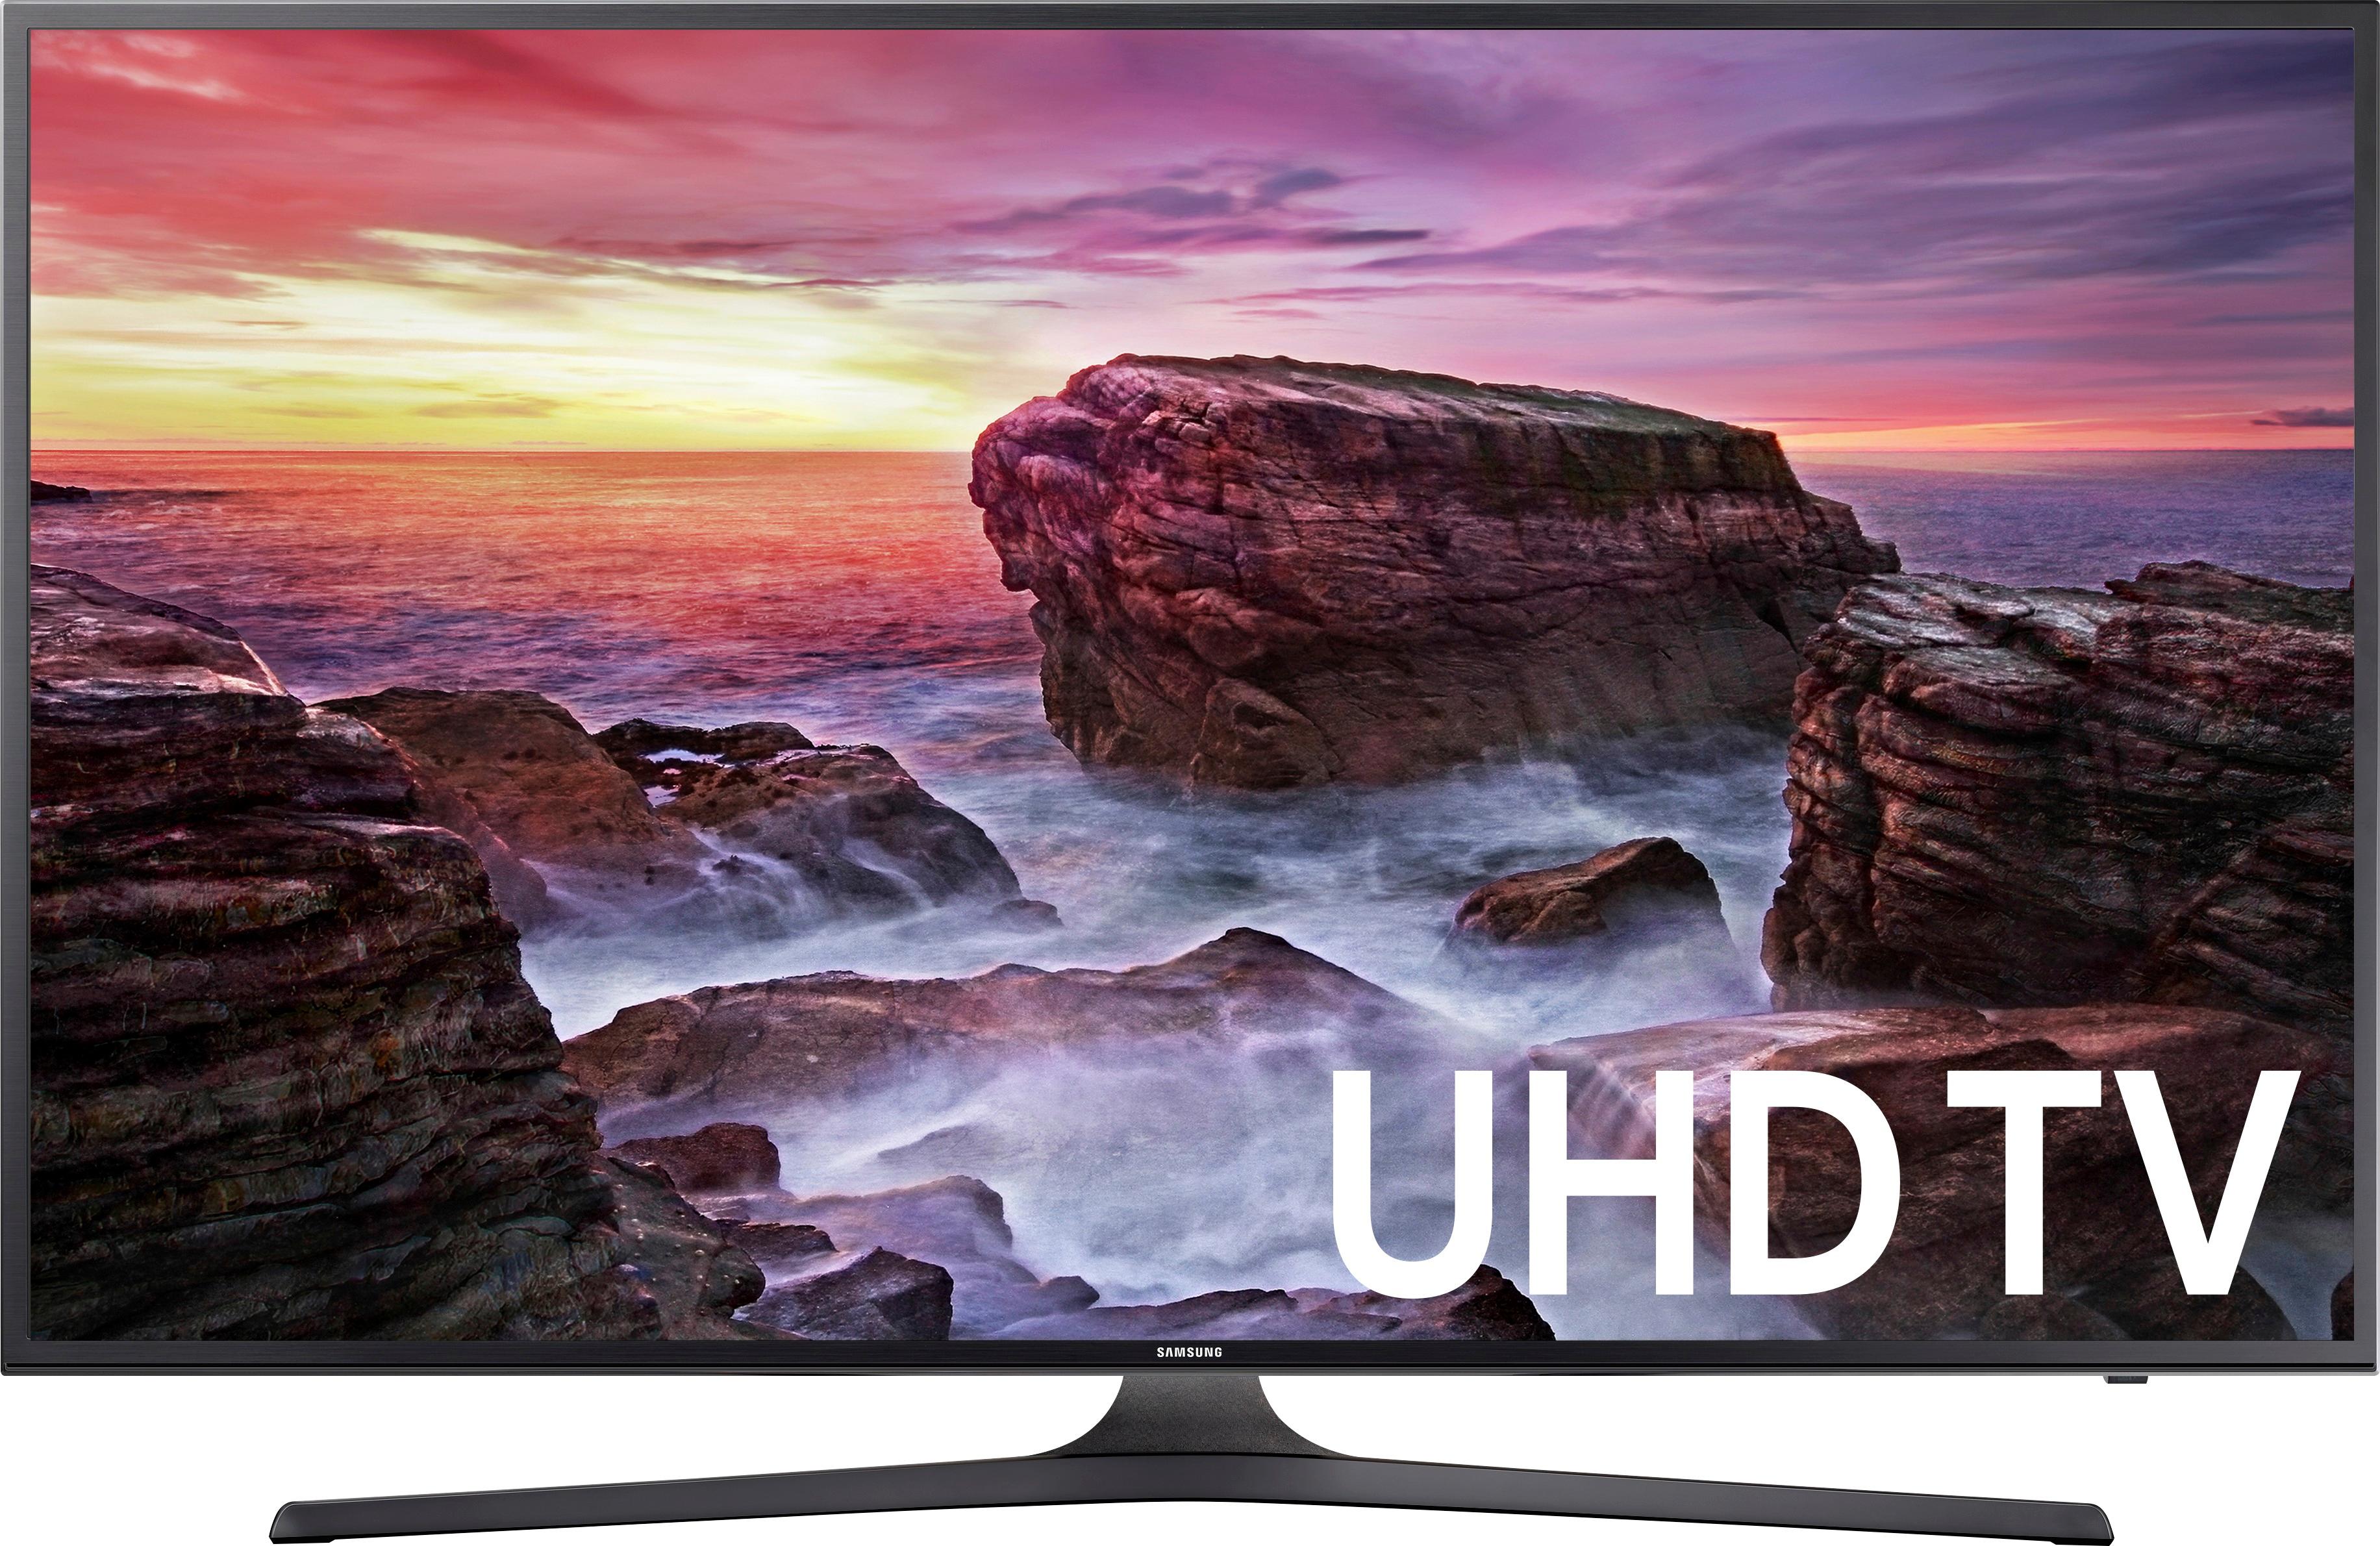 Samsung 50" Class LED MU6070 Series 2160p Smart 4K Ultra HD TV with HDR - Best Buy